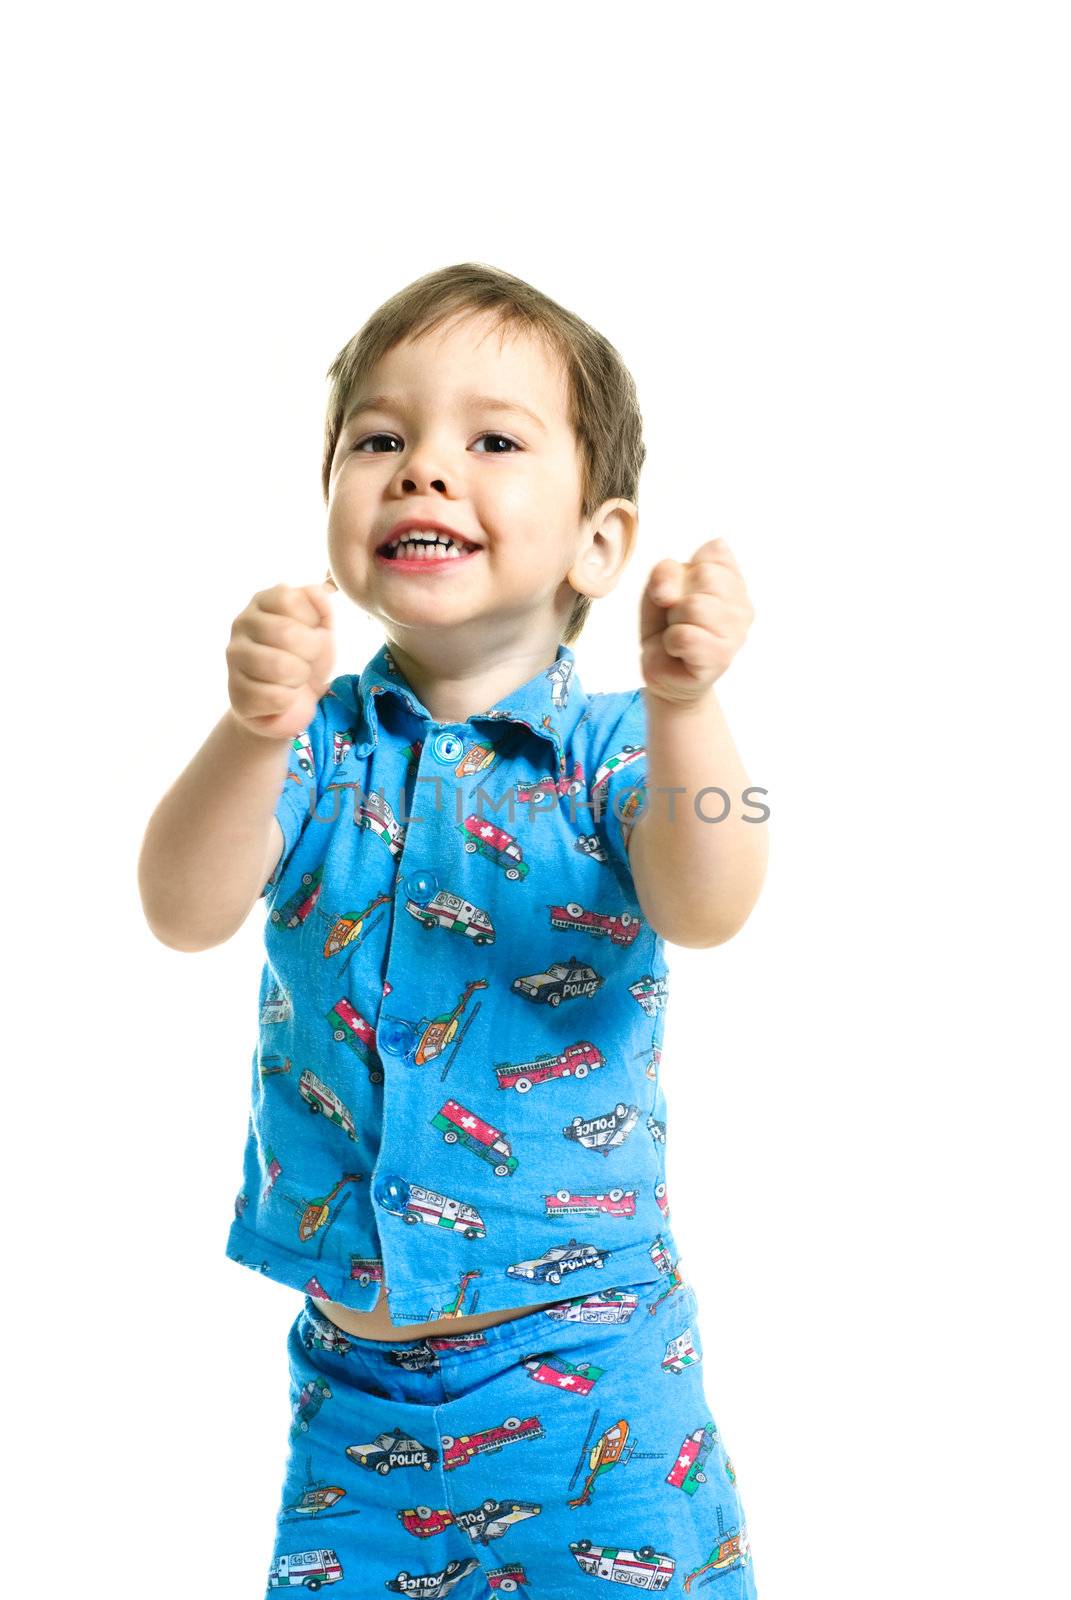 cute excited three year old boy with his hands up  